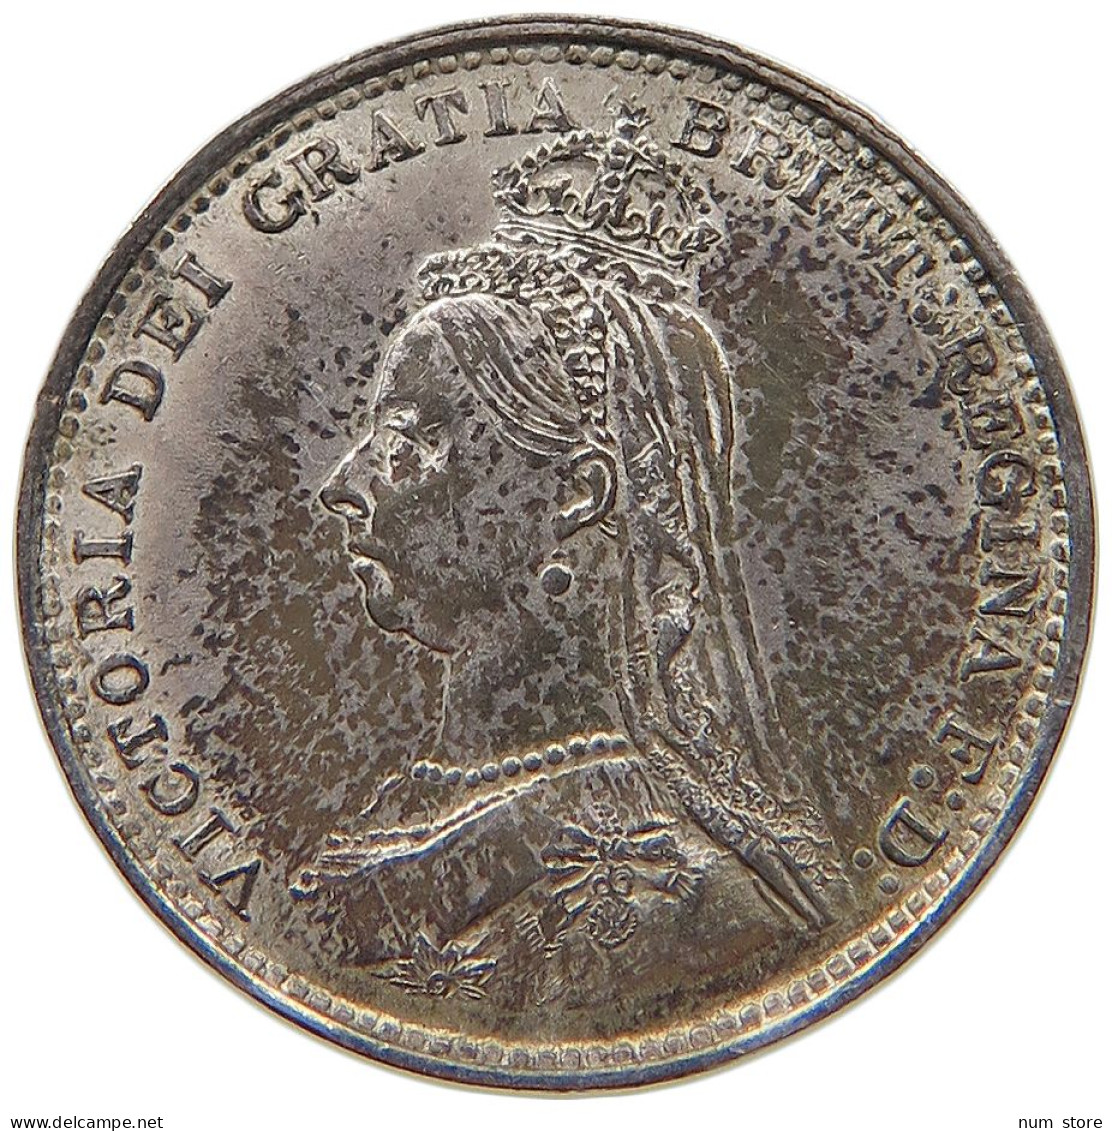 GREAT BRITAIN THREEPENCE 1887 Victoria 1837-1901 #t112 1357 - F. 3 Pence